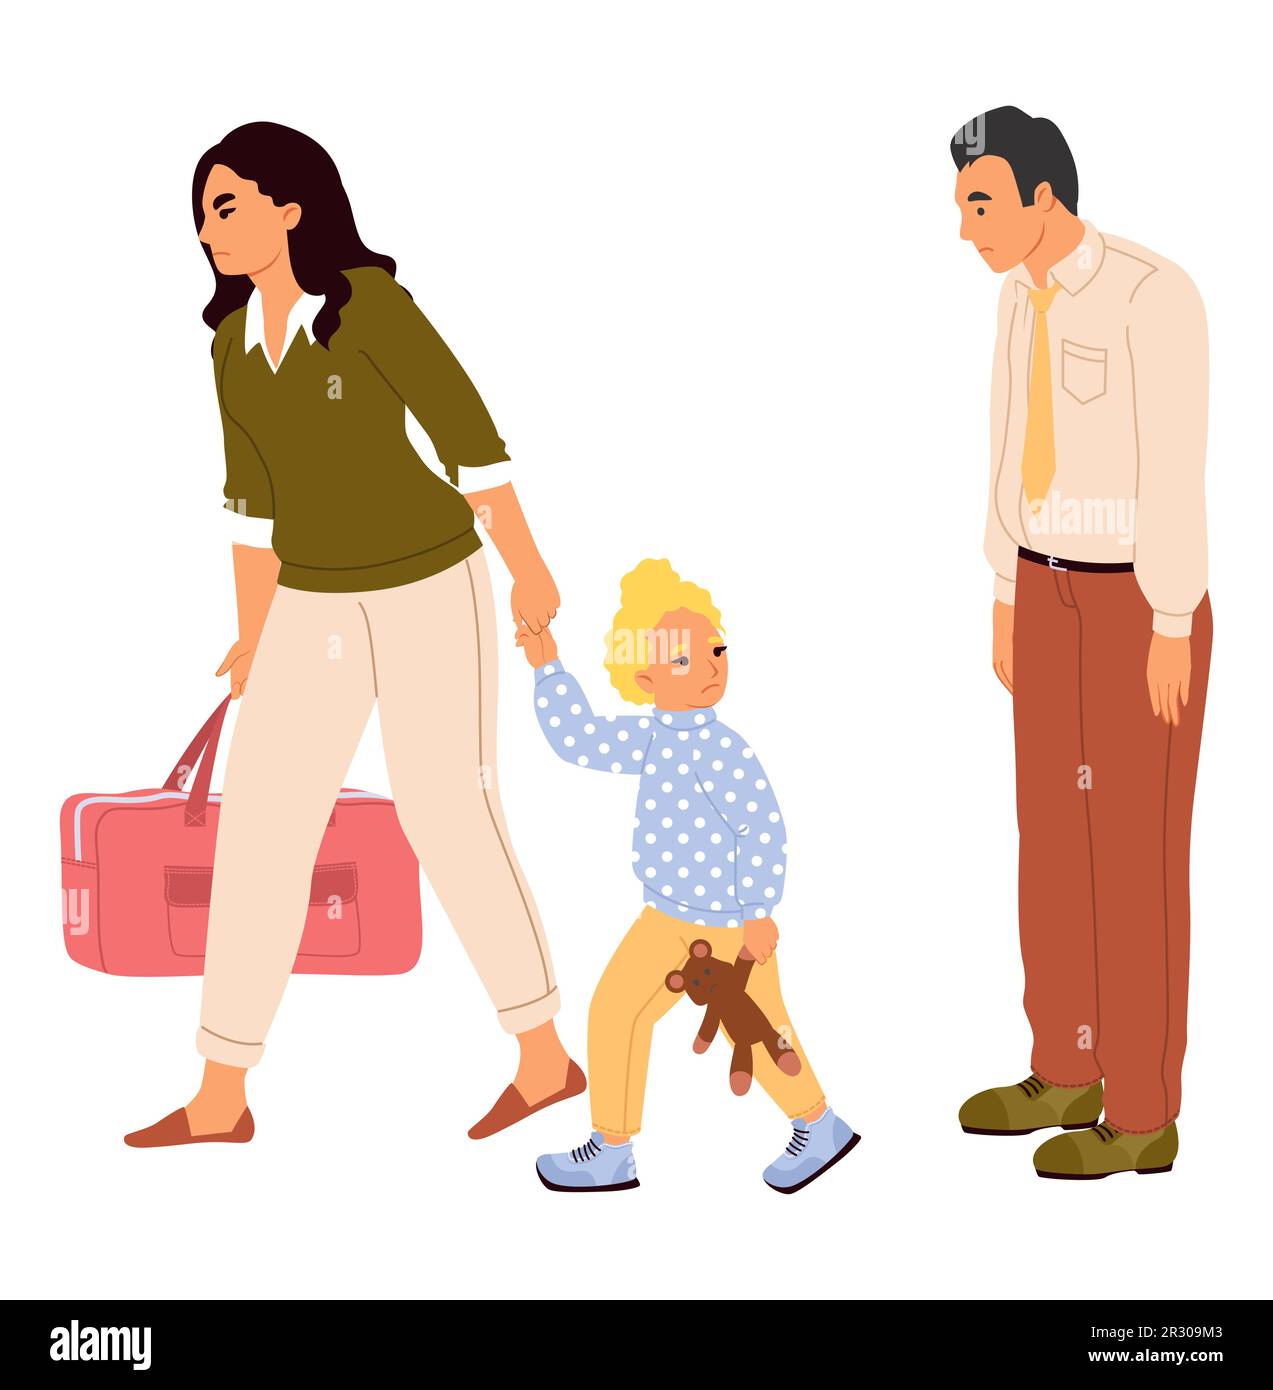 Parents divorce vector illustration wife with child leaving husband Stock Vector